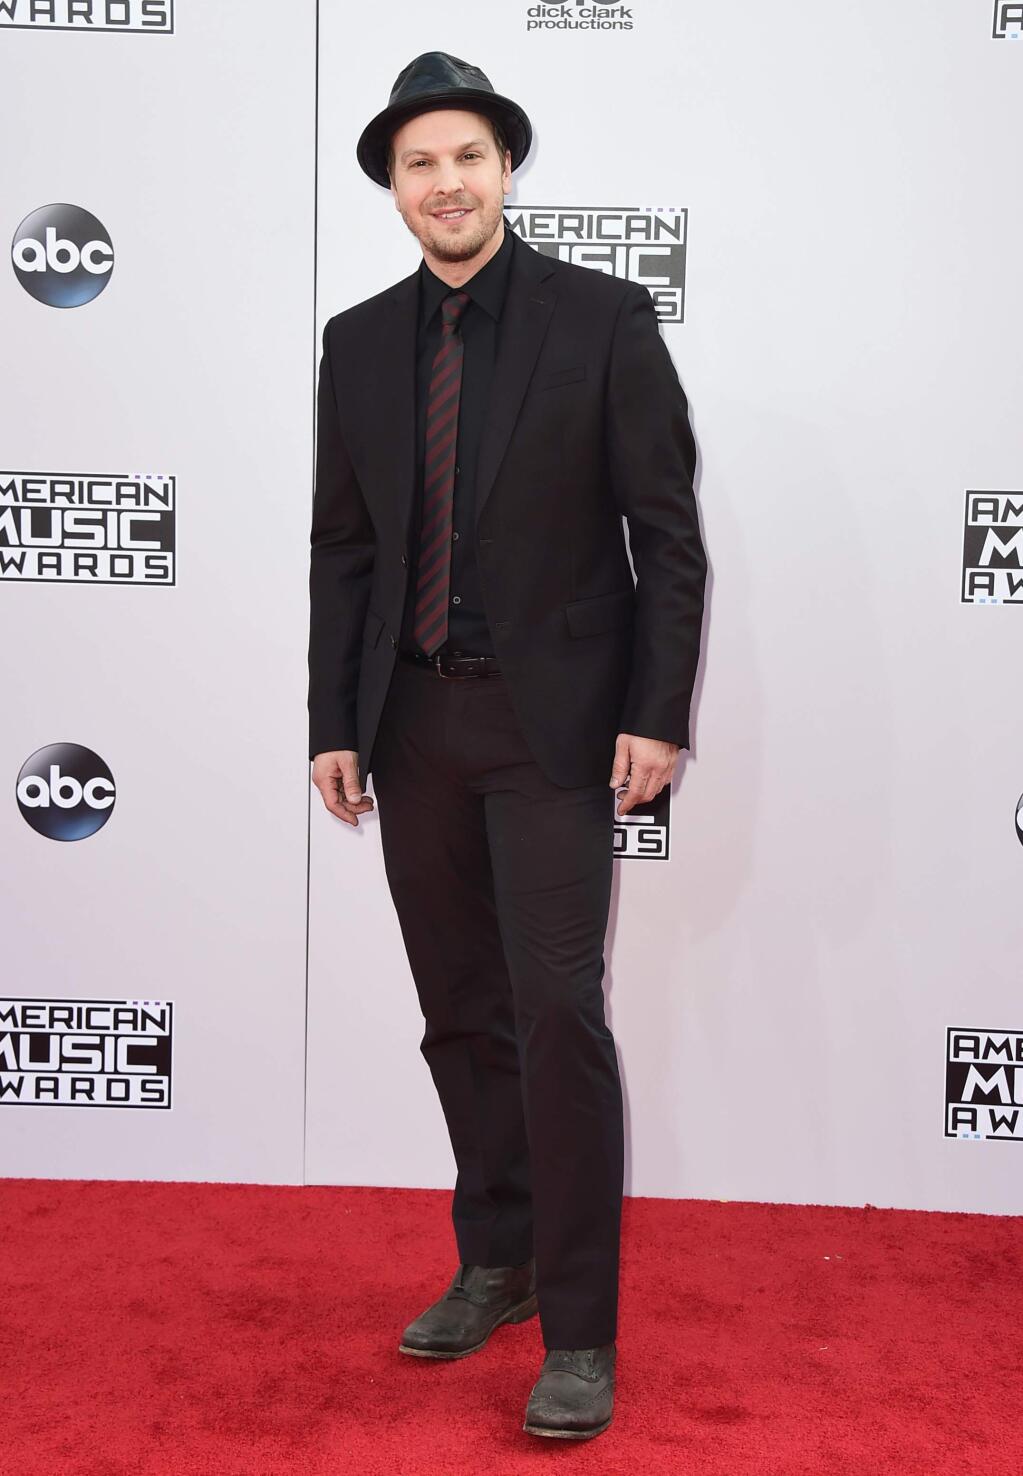 Gavin DeGraw arrives at the 42nd annual American Music Awards at Nokia Theatre L.A. Live on Sunday, Nov. 23, 2014, in Los Angeles. (Photo by Jordan Strauss/Invision/AP)